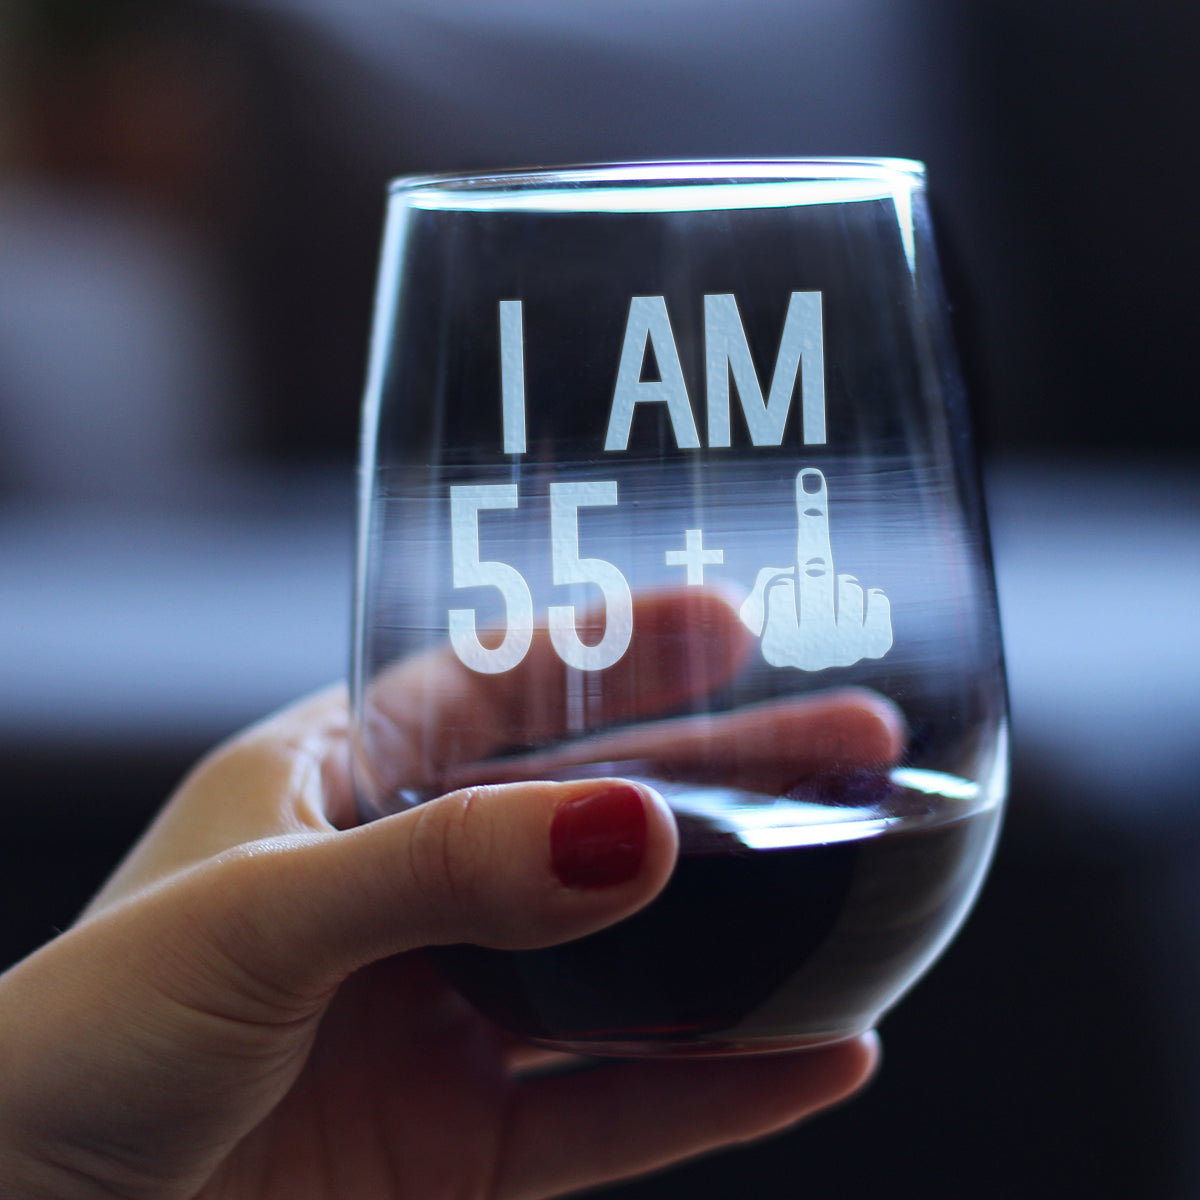 I Am 55 + 1 Middle Finger Funny Stemless Wine Glass, Large 17 Ounce Size, Etched Sayings, 56th Birthday Gift for Women Turning 56